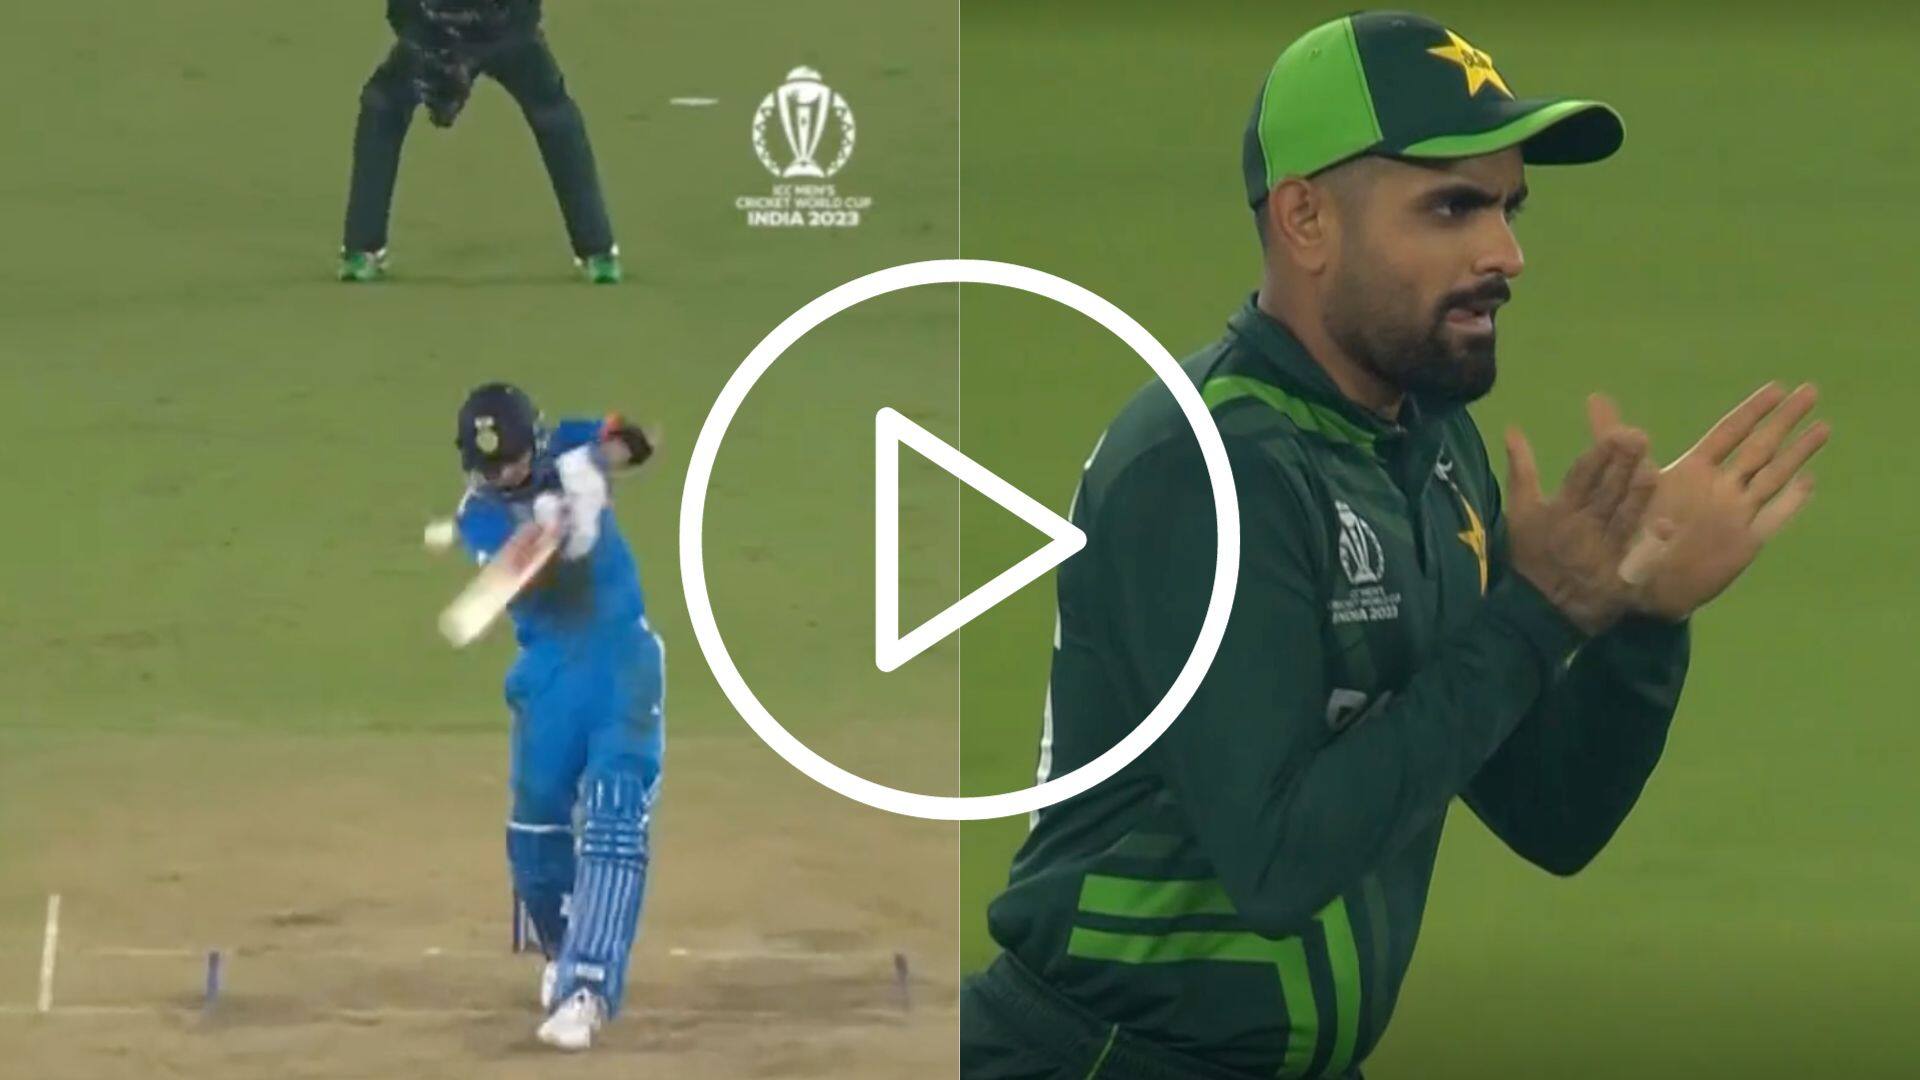 [Watch] Babar Azam ‘Super-Delighted’ As Virat Kohli Throws His Wicket Away